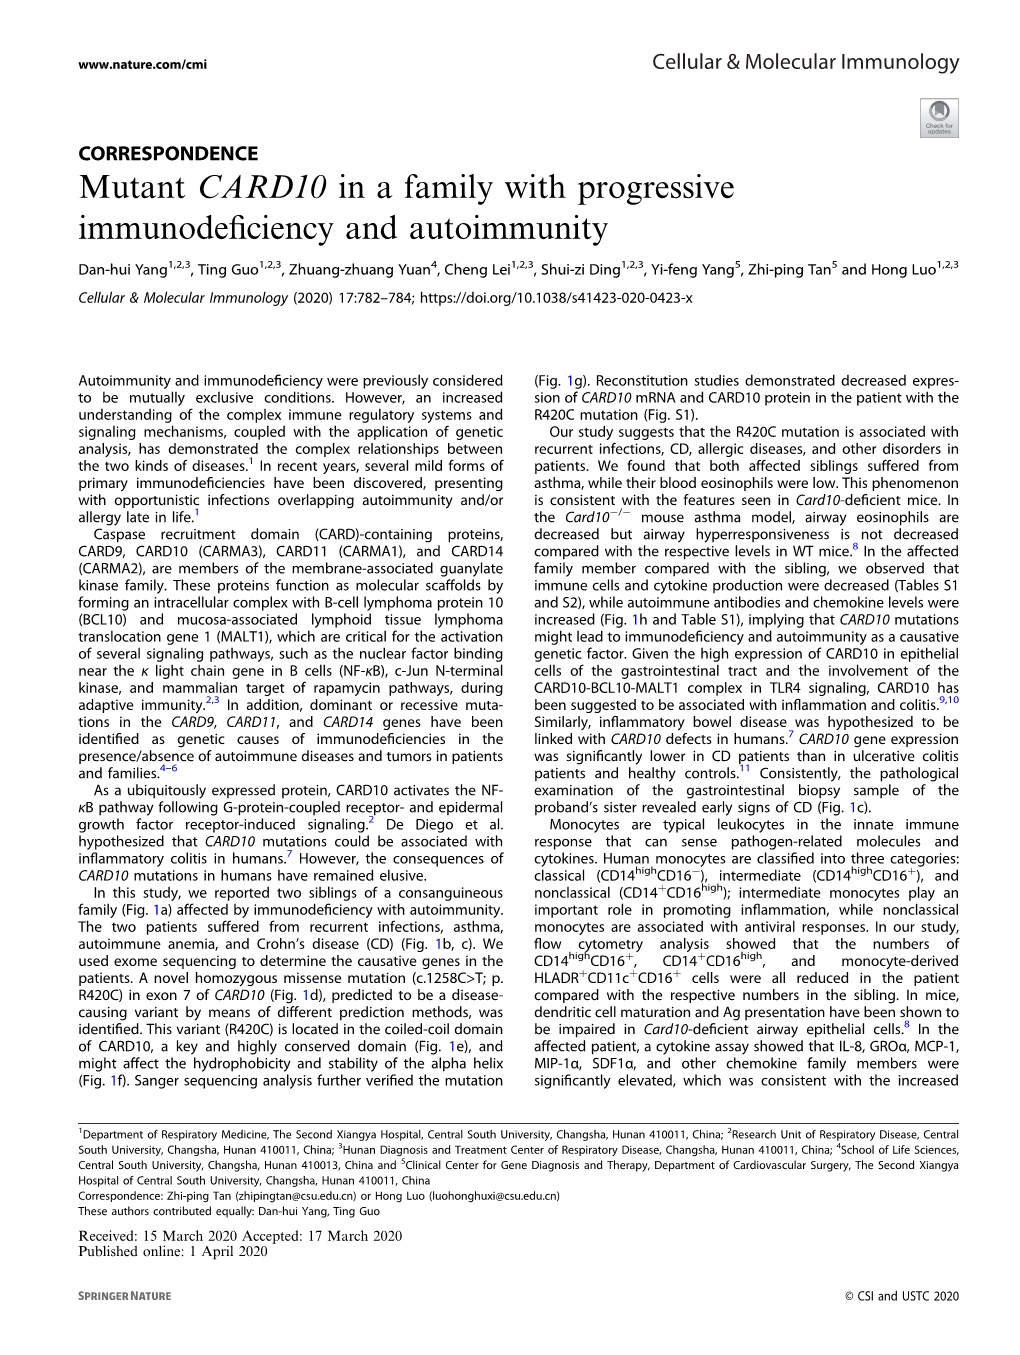 CARD10 in a Family with Progressive Immunodeﬁciency and Autoimmunity